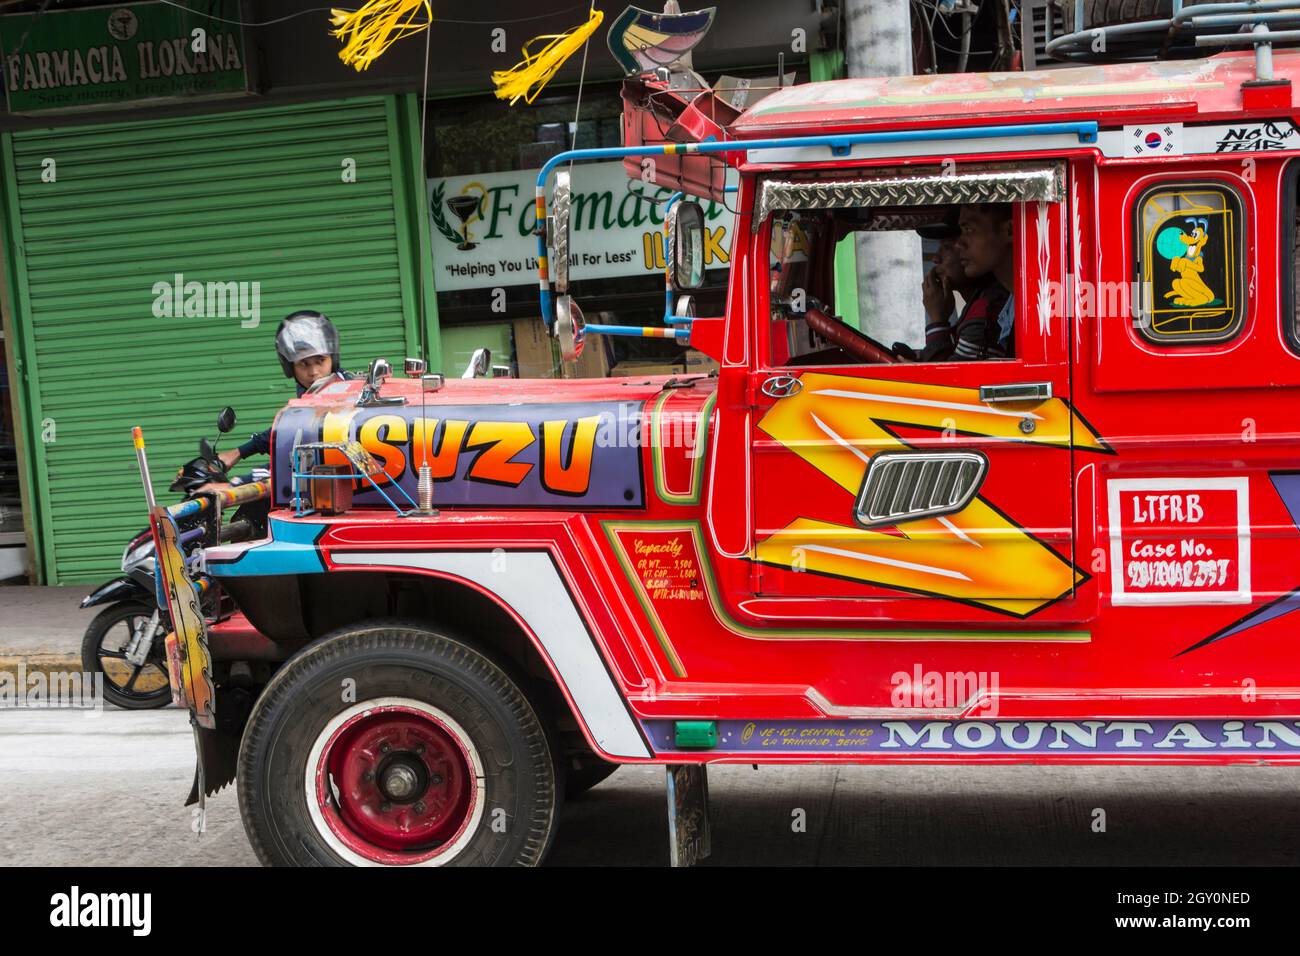 A red jeepney in the streets of Baguio city, Philippines Stock Photo